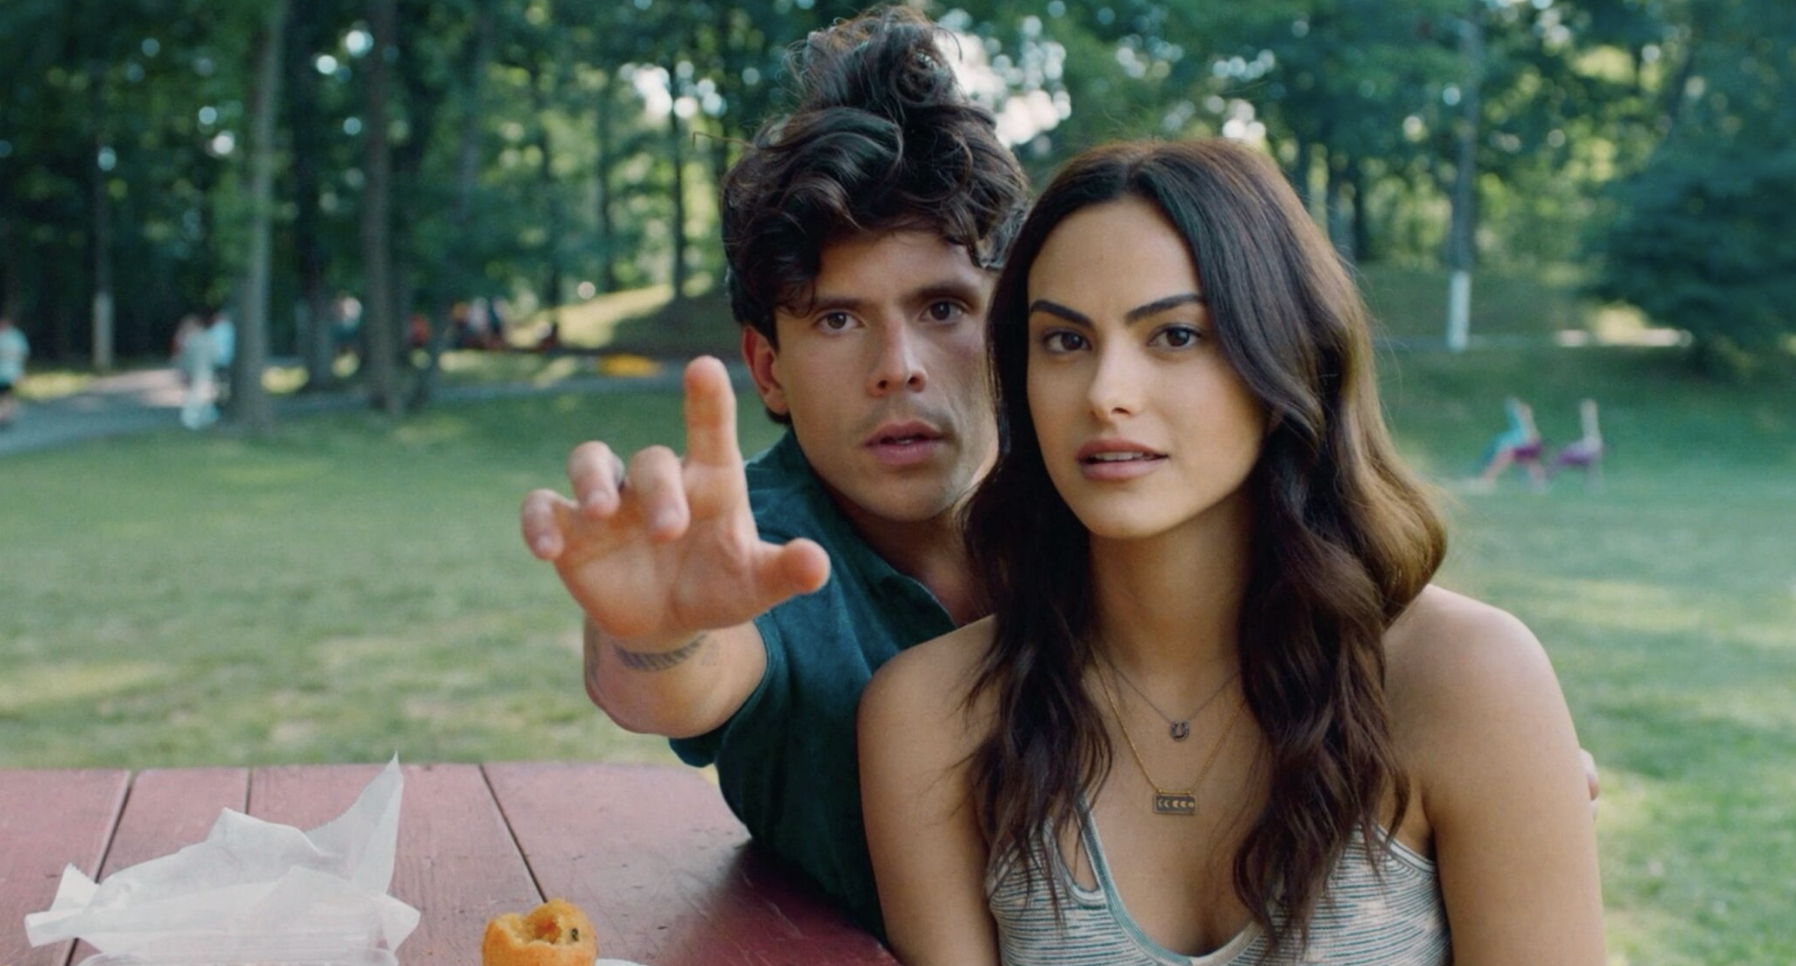 'Música' Trailer: Rudy Manusco And Camila Mendes In Personal Coming-Of-Age Story Headed To Prime Video